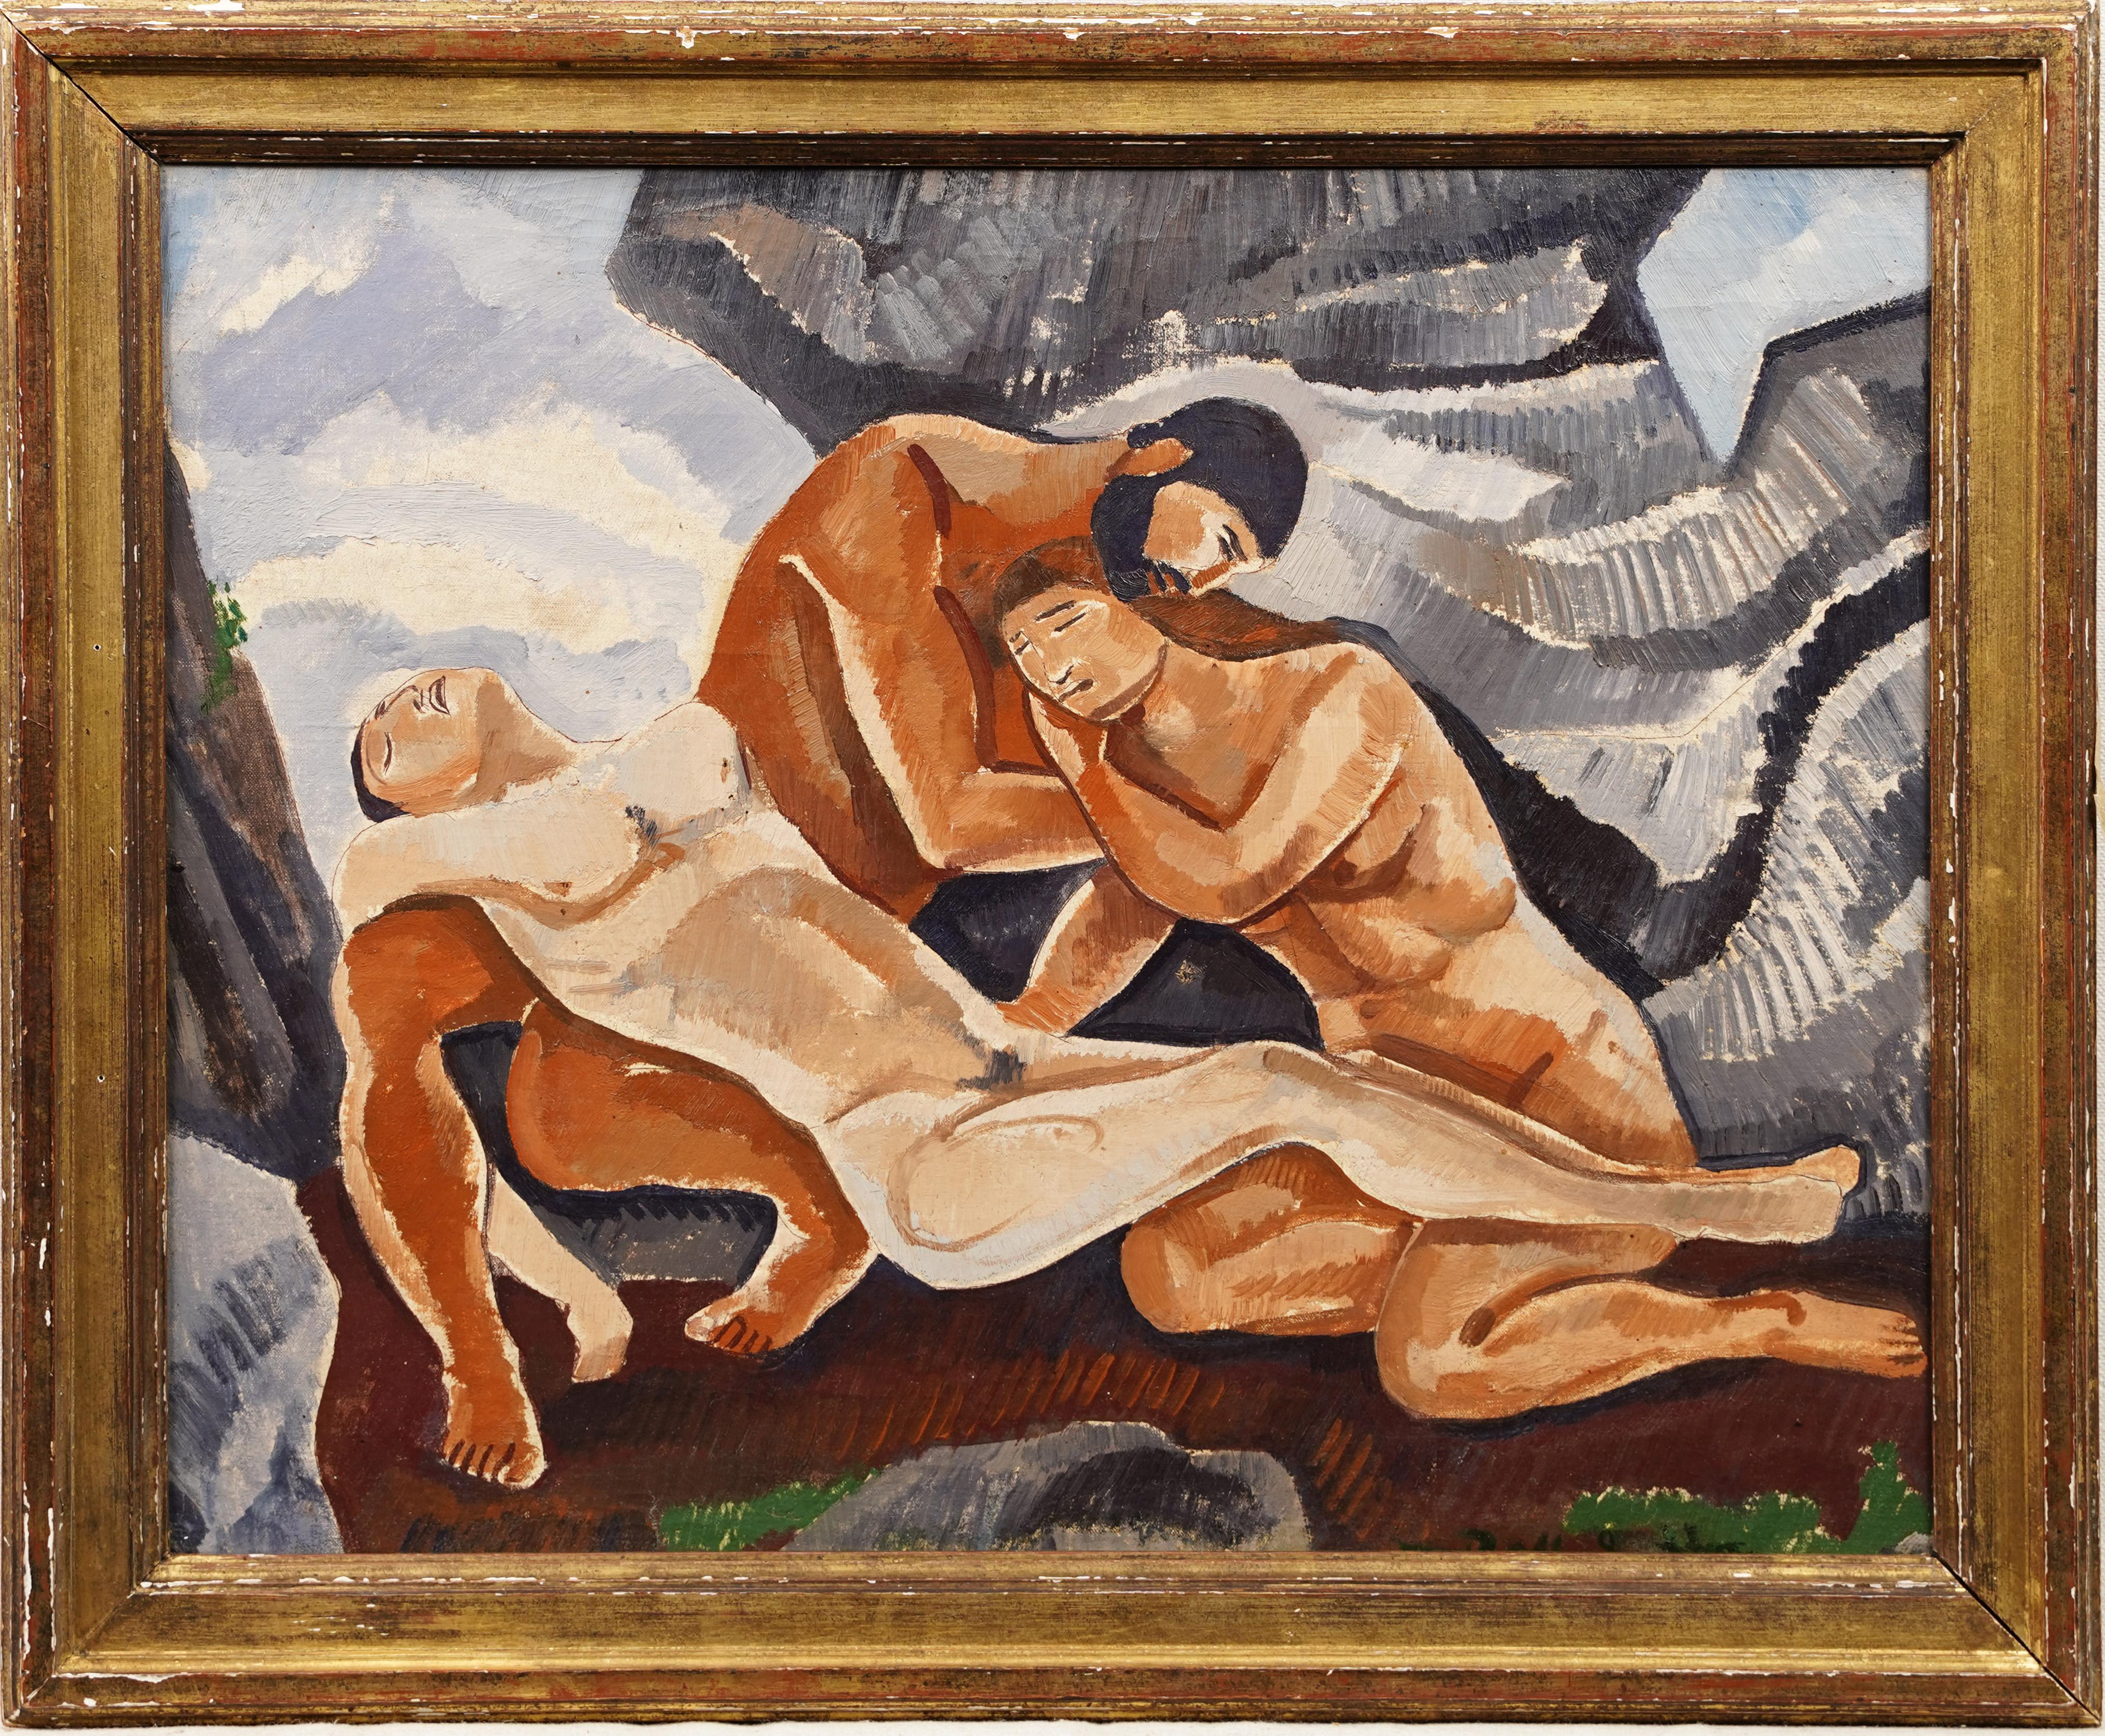 Nude Painting Unknown - Portrait à l'huile signé Early 20th Century Modernist Male Lovers Gay Erotic (Hommes amoureux érotiques)